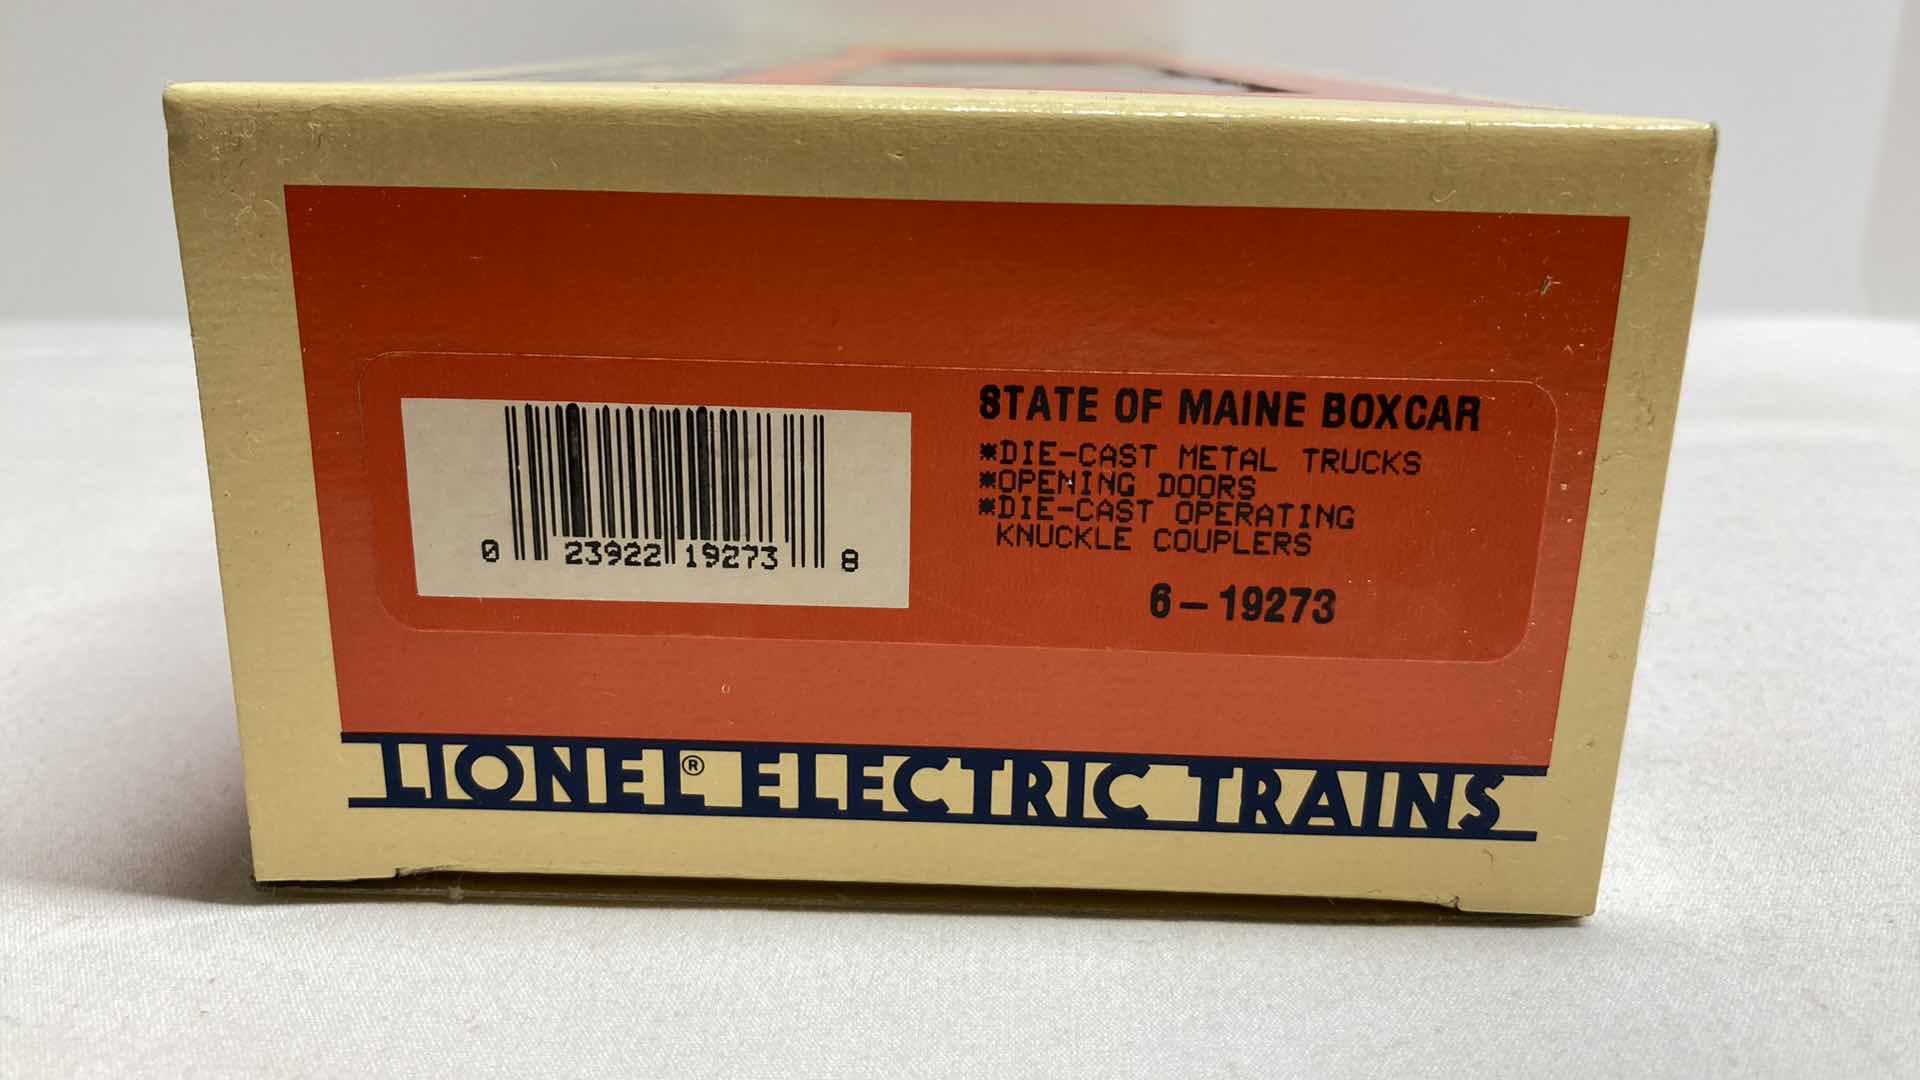 Photo 3 of LIONEL ELECTRIC TRAINS STATE OF MAINE BOX CAR 6-19273